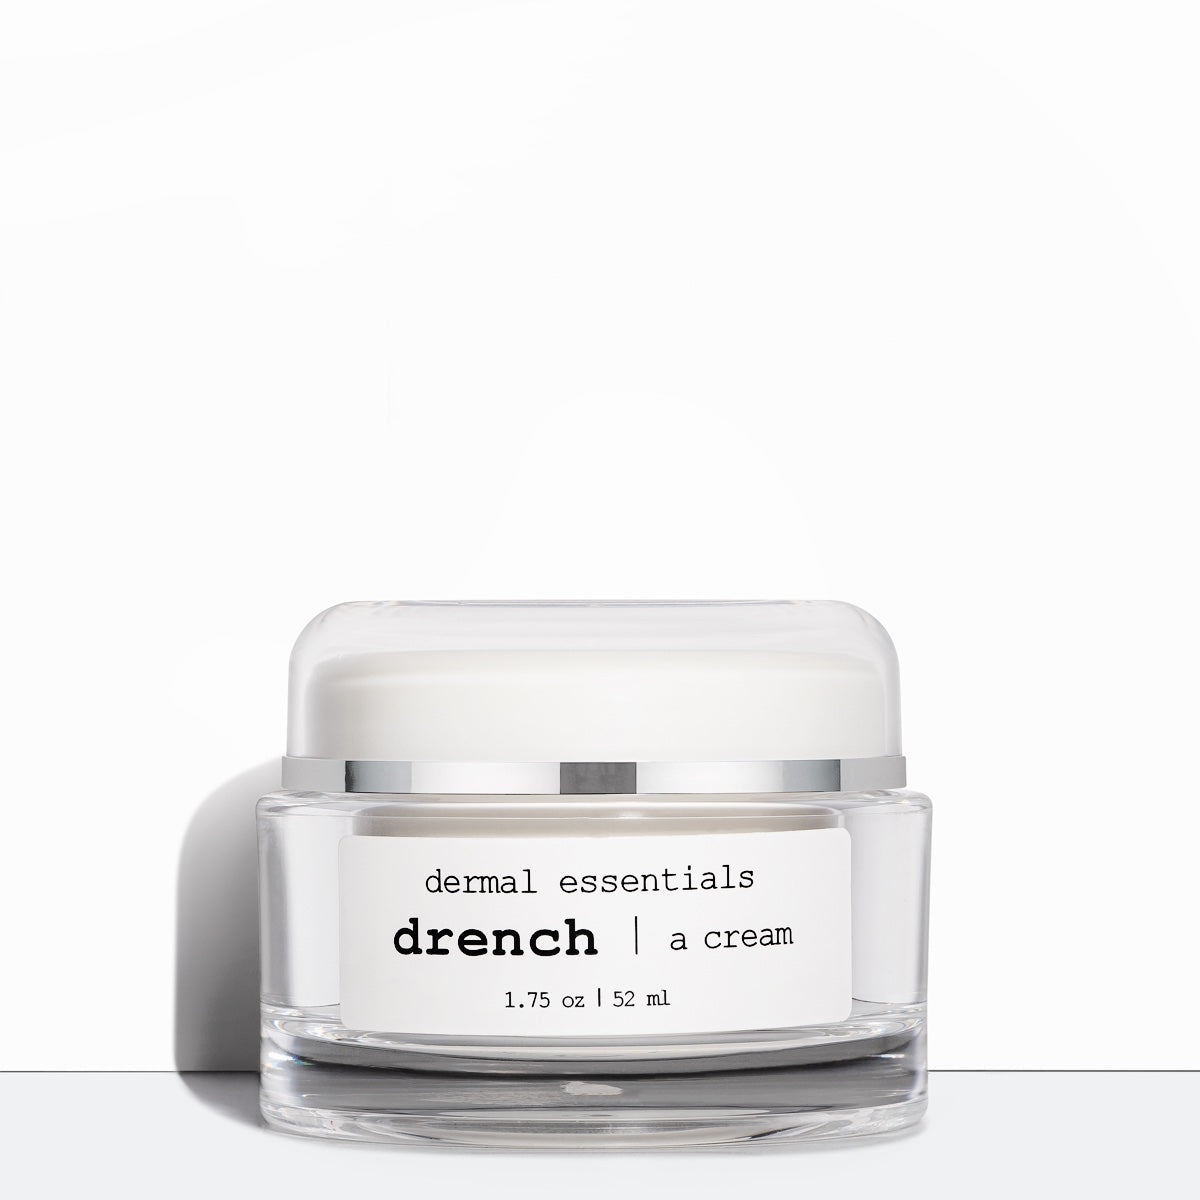 Full size 1.75 oz. Clear round plastic jar white label  black letters round plastic twist lid. Drench is a beauty cream moisturizer ceramides peptides antioxidant Dermal Essentials Medical Grade Skincare. A mini size is 5 ml of this peptide facial cream skincare product  in a round clear plastic jar white label with black letters white screw lid.